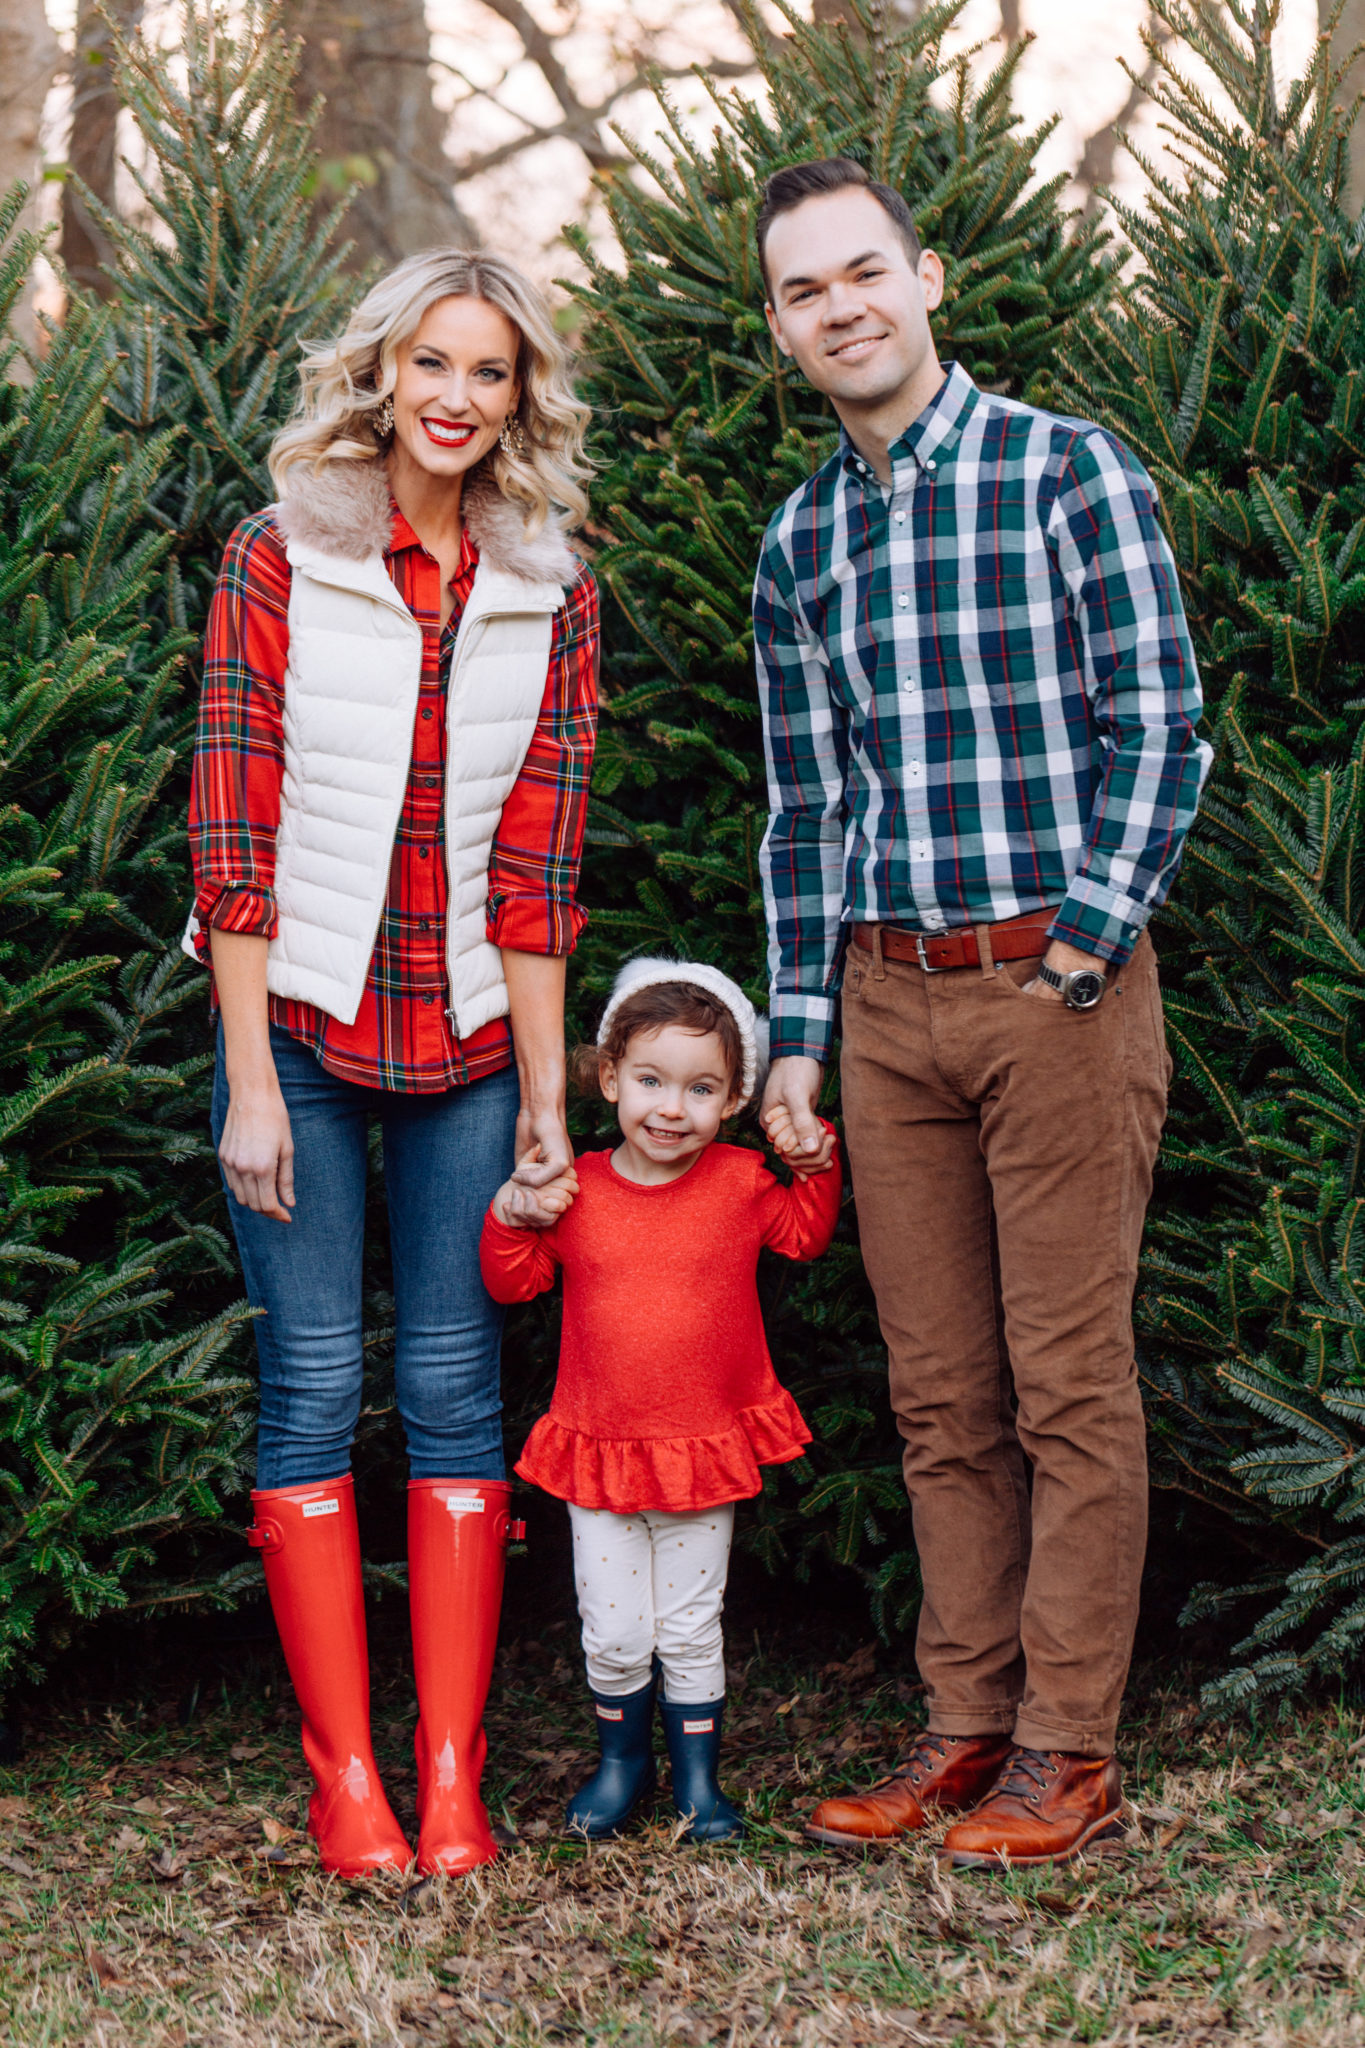 What to Wear for Family Christmas Tree Farm Photos - Straight A Style